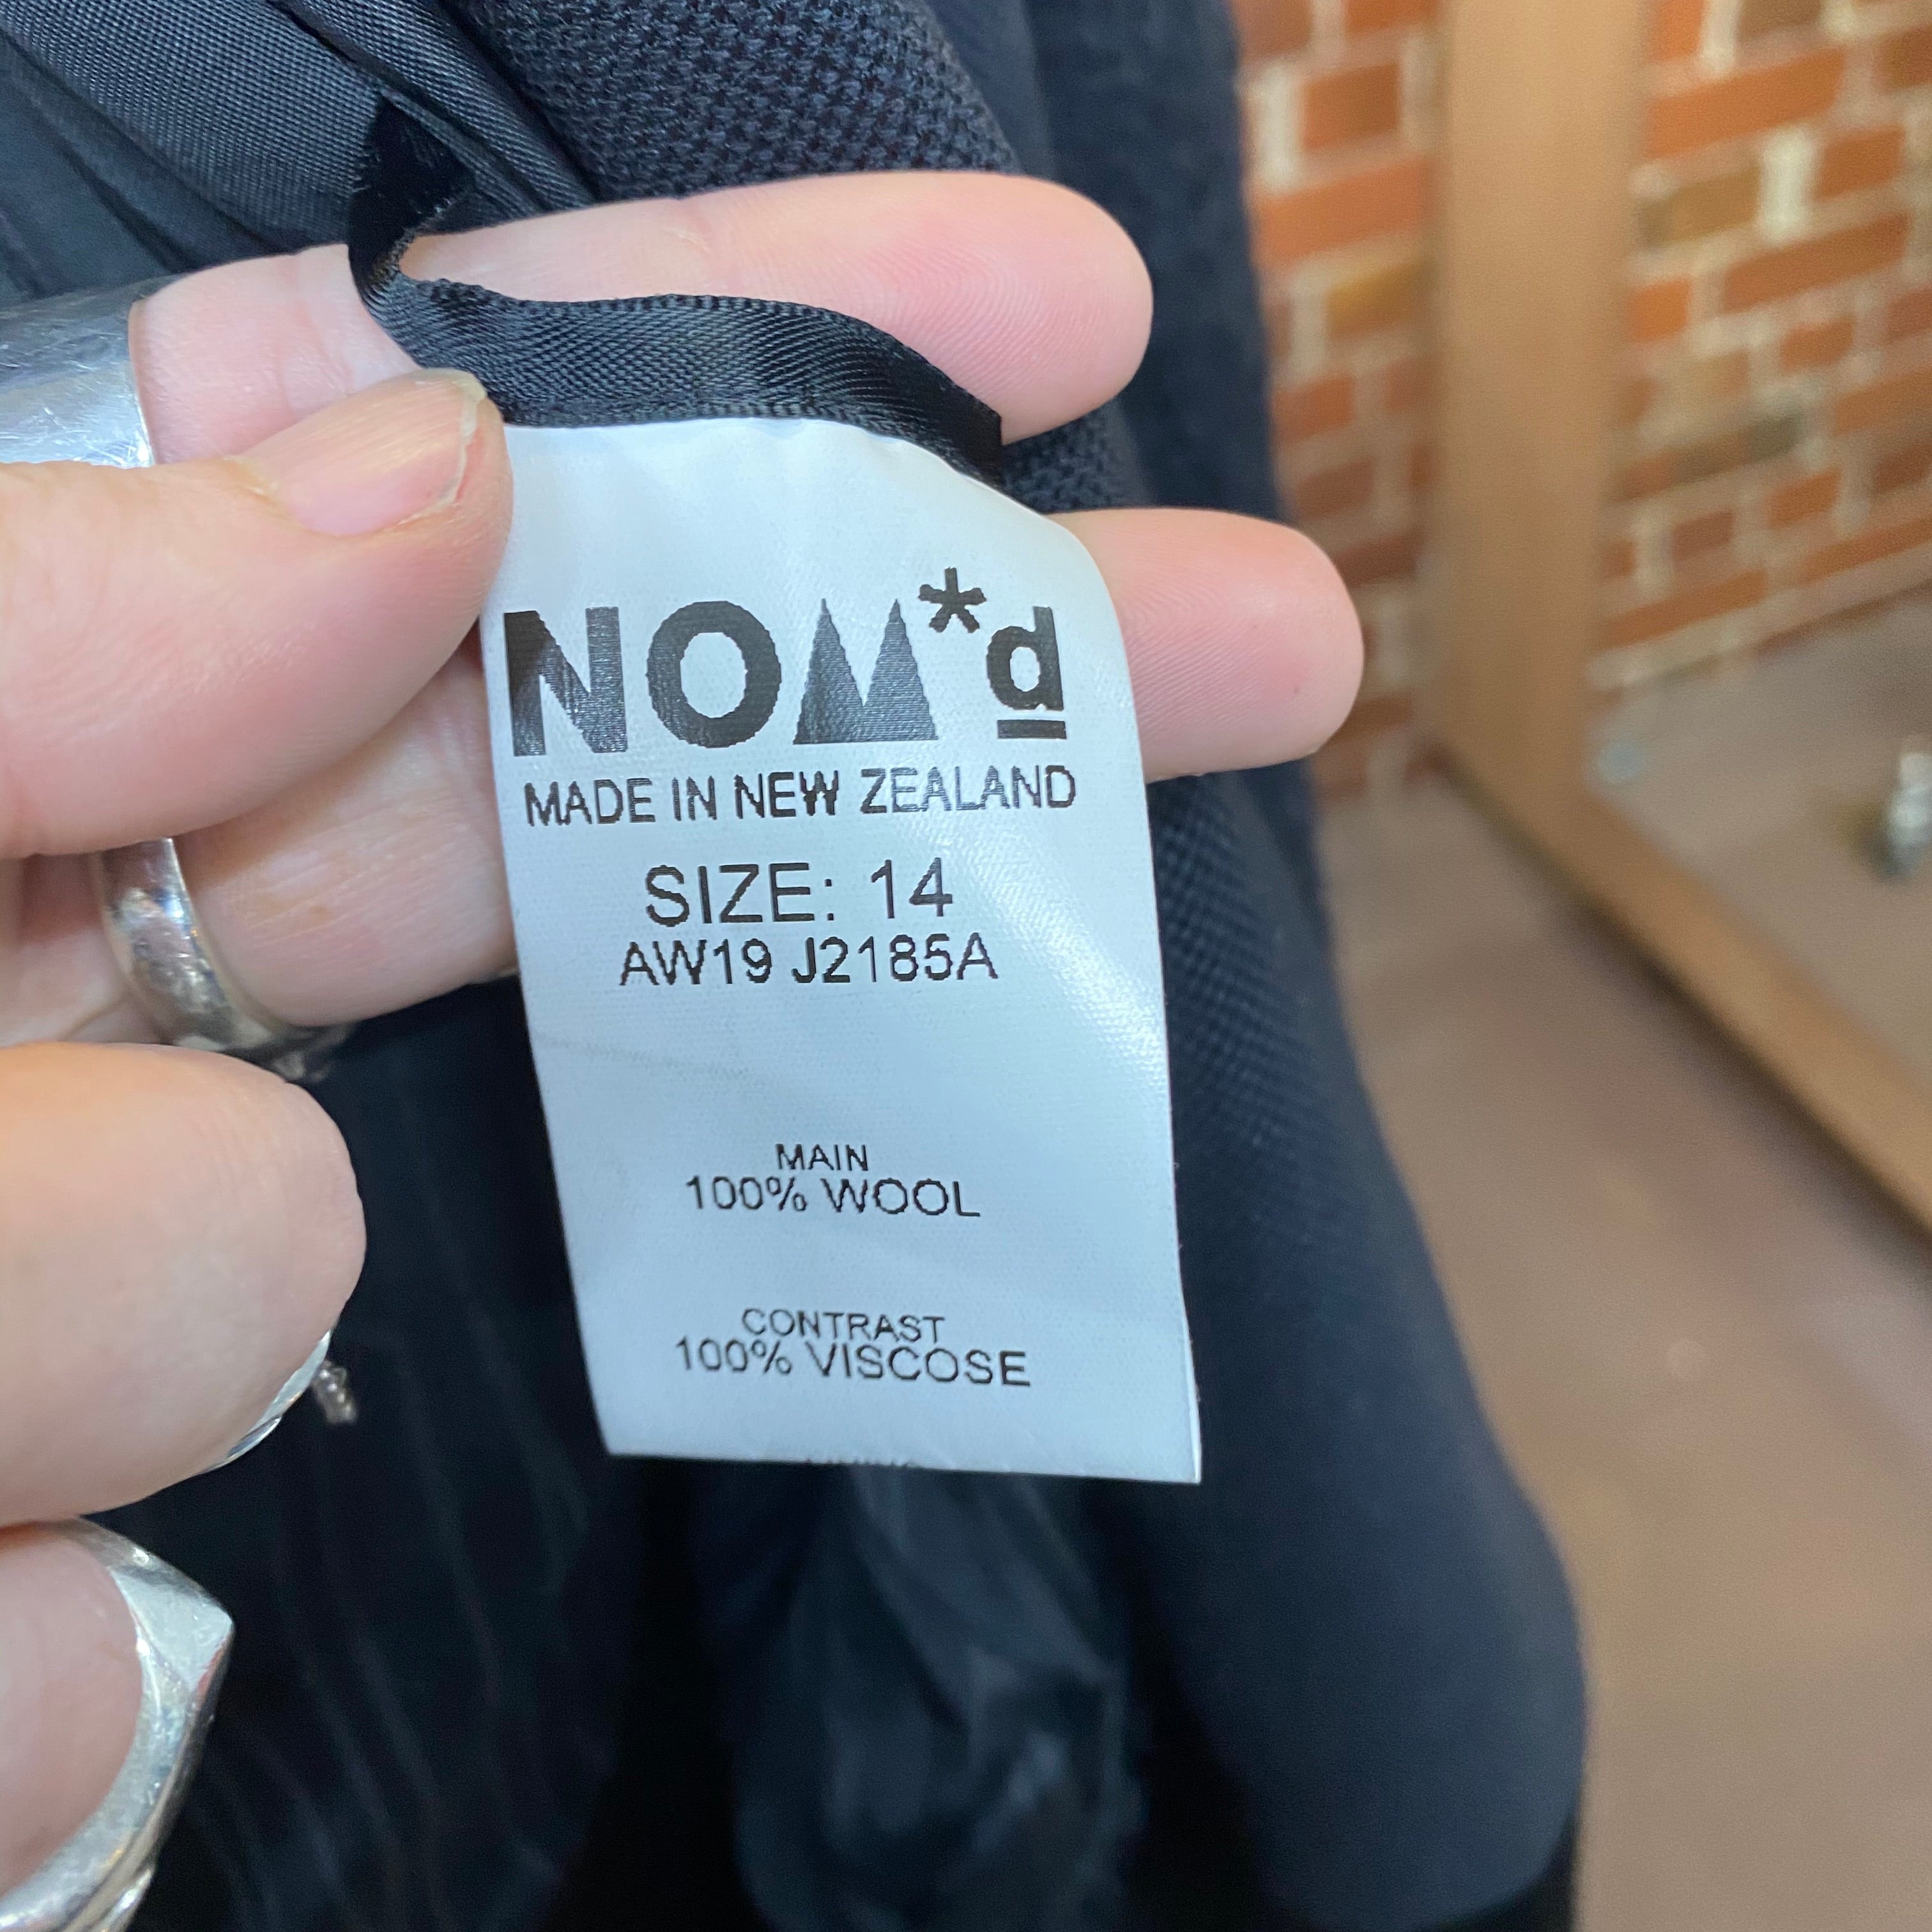 NOM-D relaxed jacket